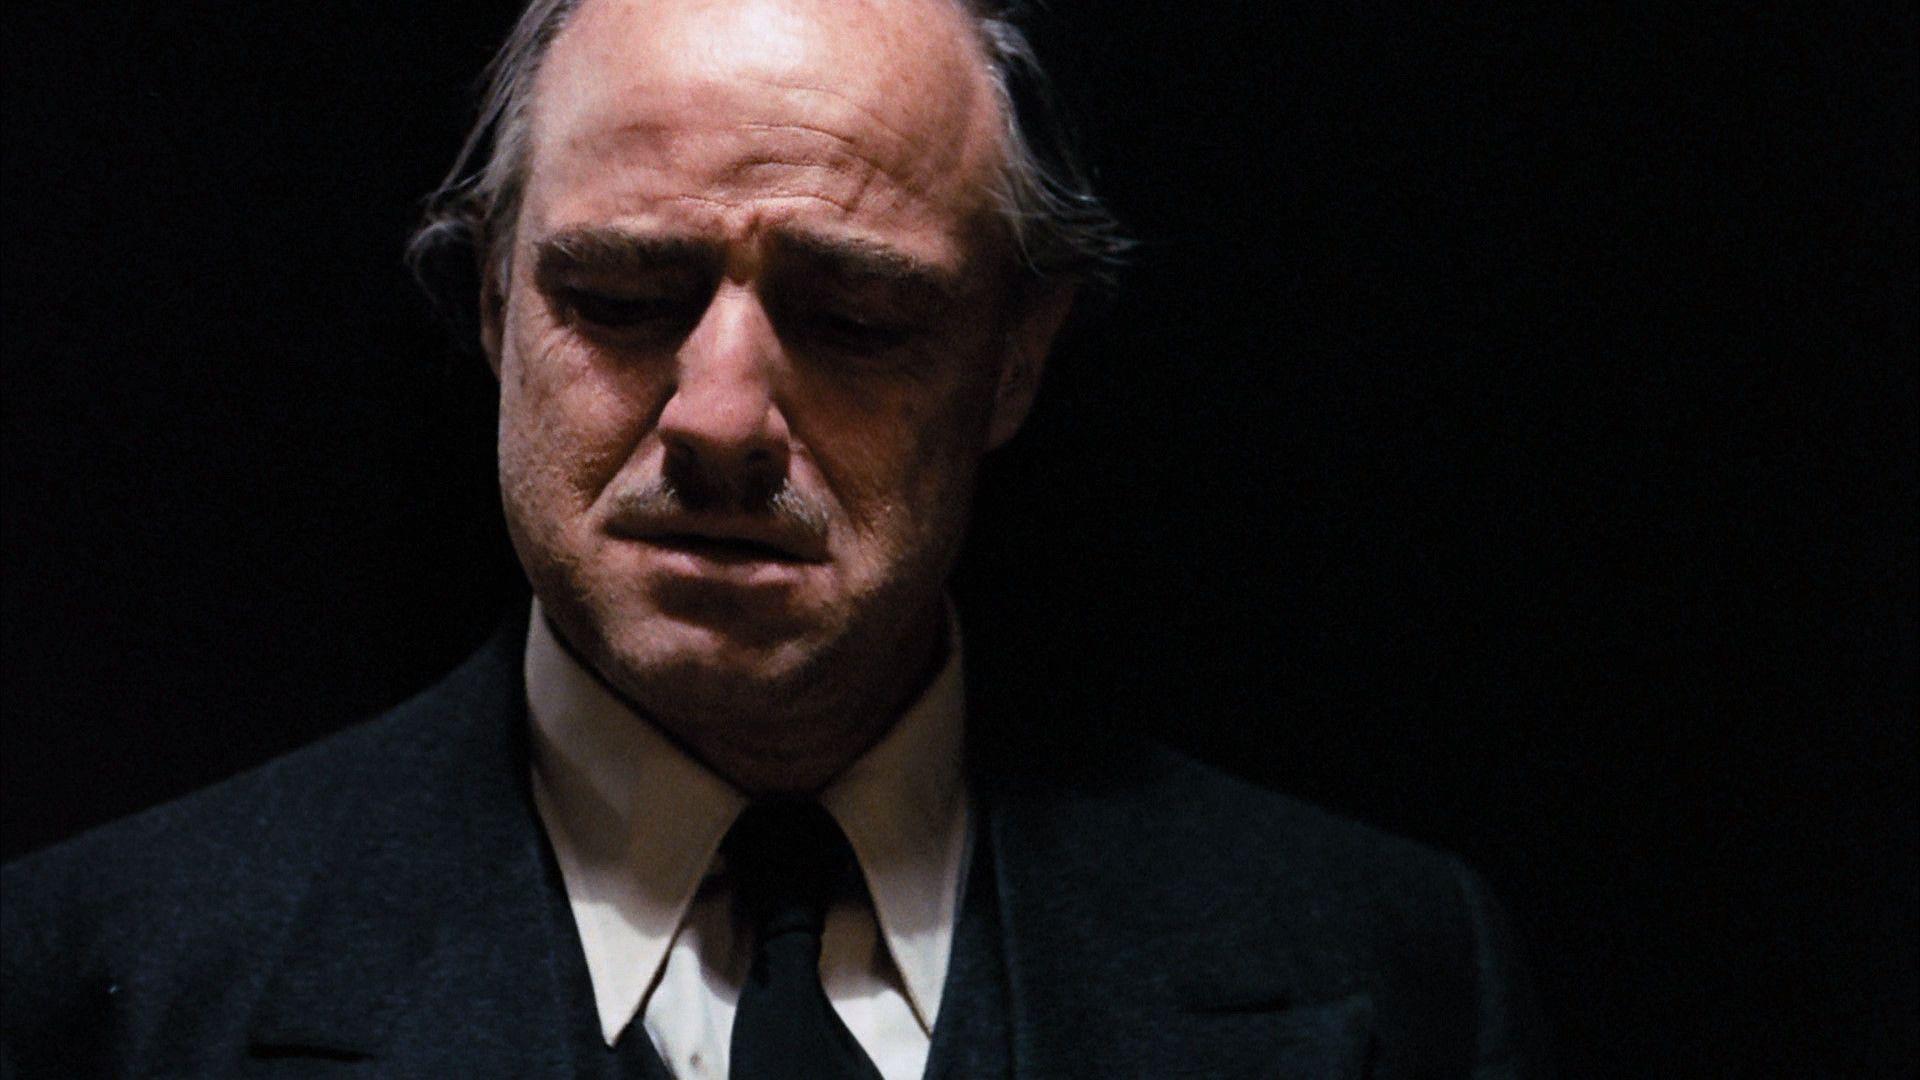 Family Business: The Godfather as Business Allegory « I Like Things